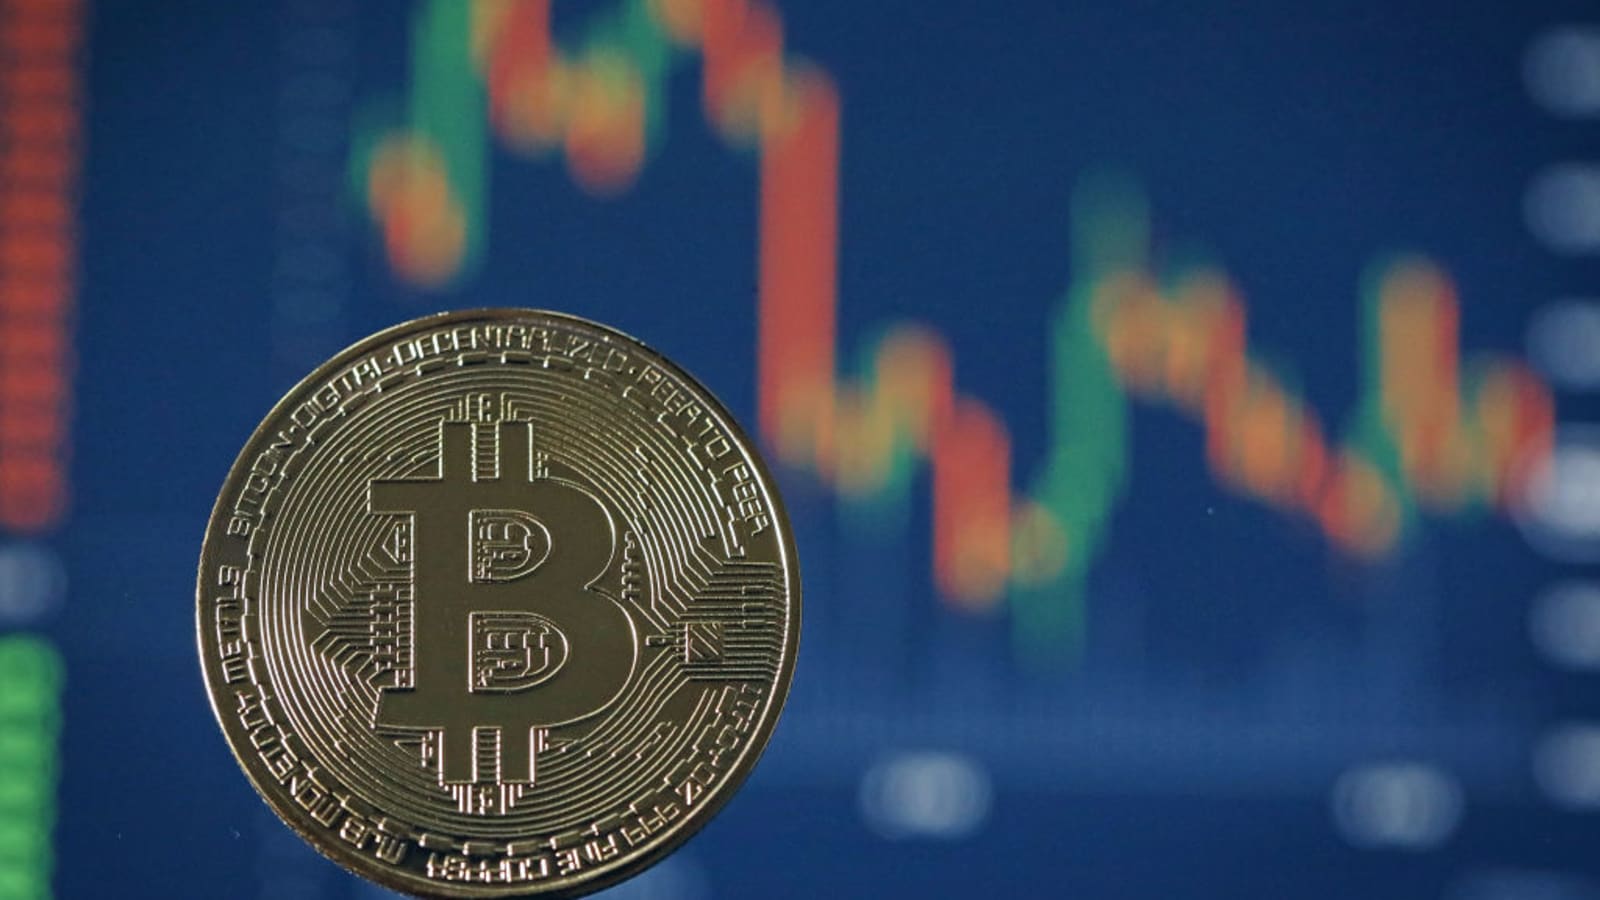 Bitcoin price hits $11,000 for the first time since January